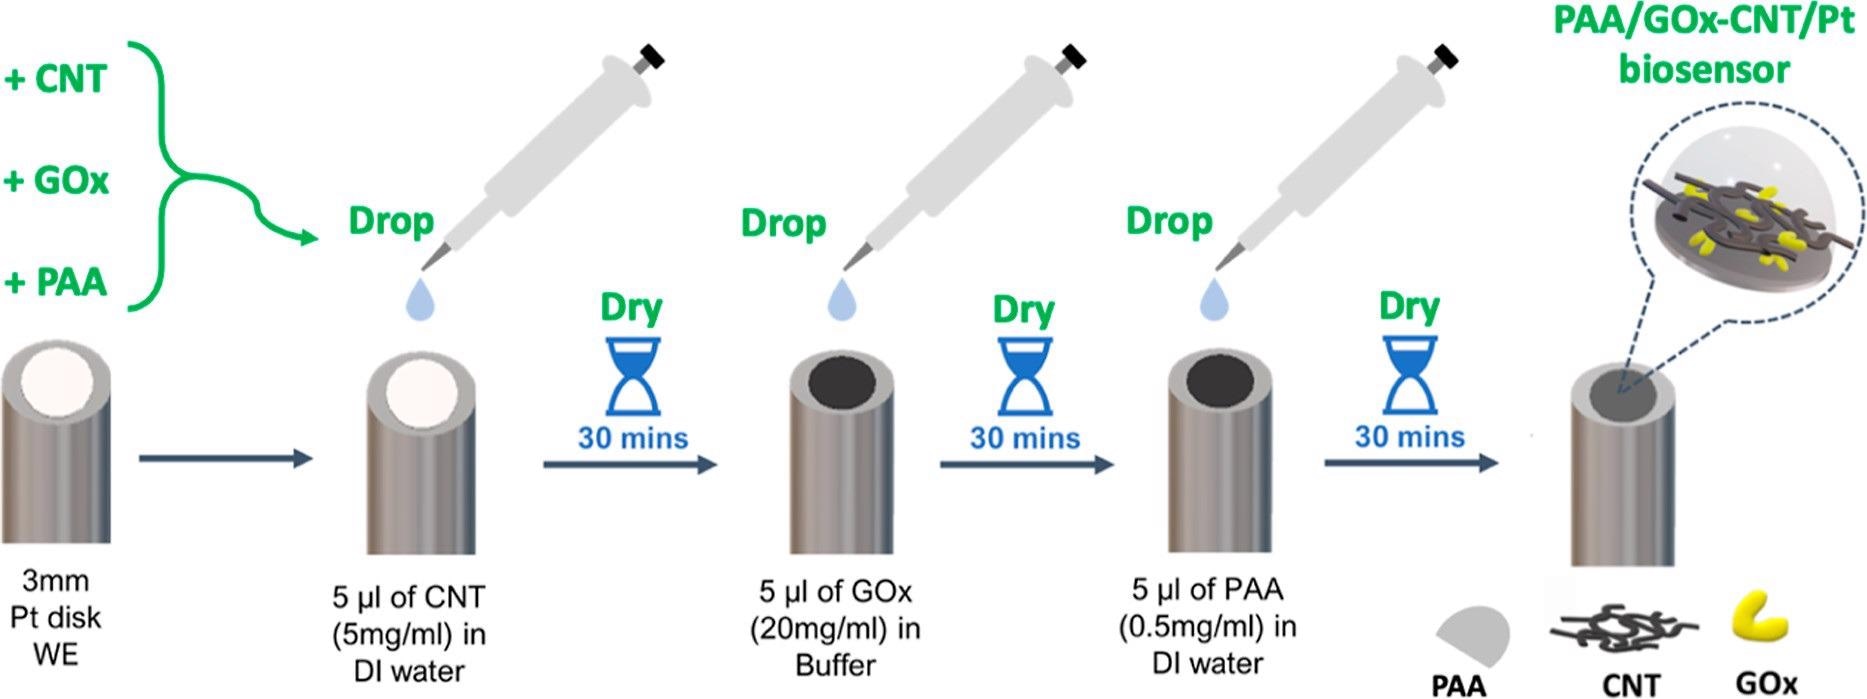 PAA/GOx-CNT/Pt glucose biosensor fabrication procedure as a simple sequence of three drop-and-dry steps with solutions or suspensions of commercial stock materials.